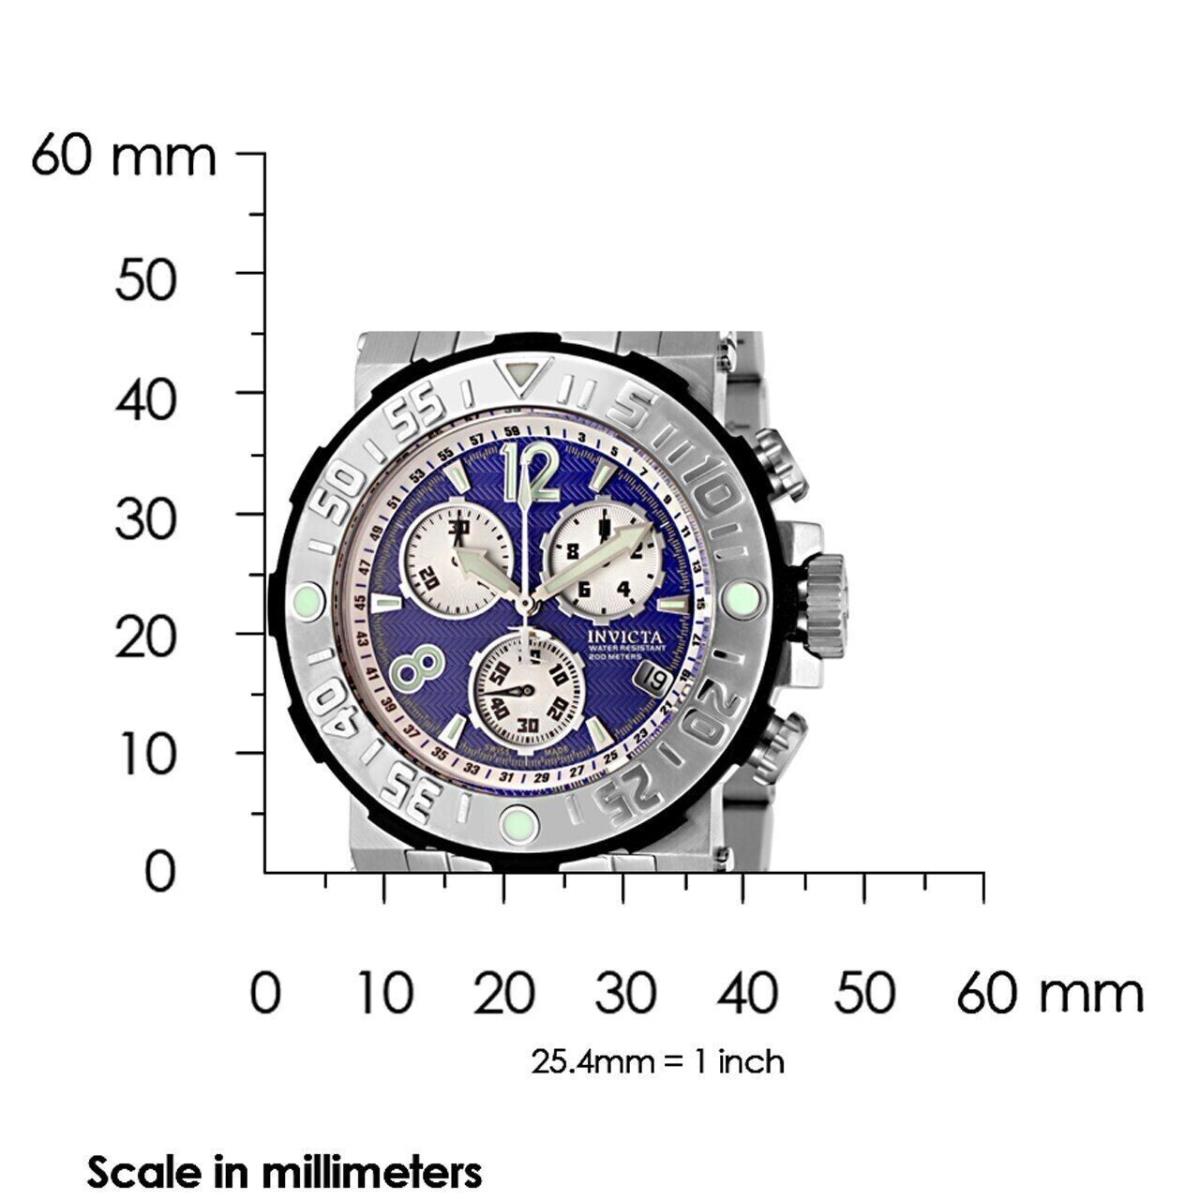 Invicta watch  - Dial: Blue, Band: Silver, Bezel: Black